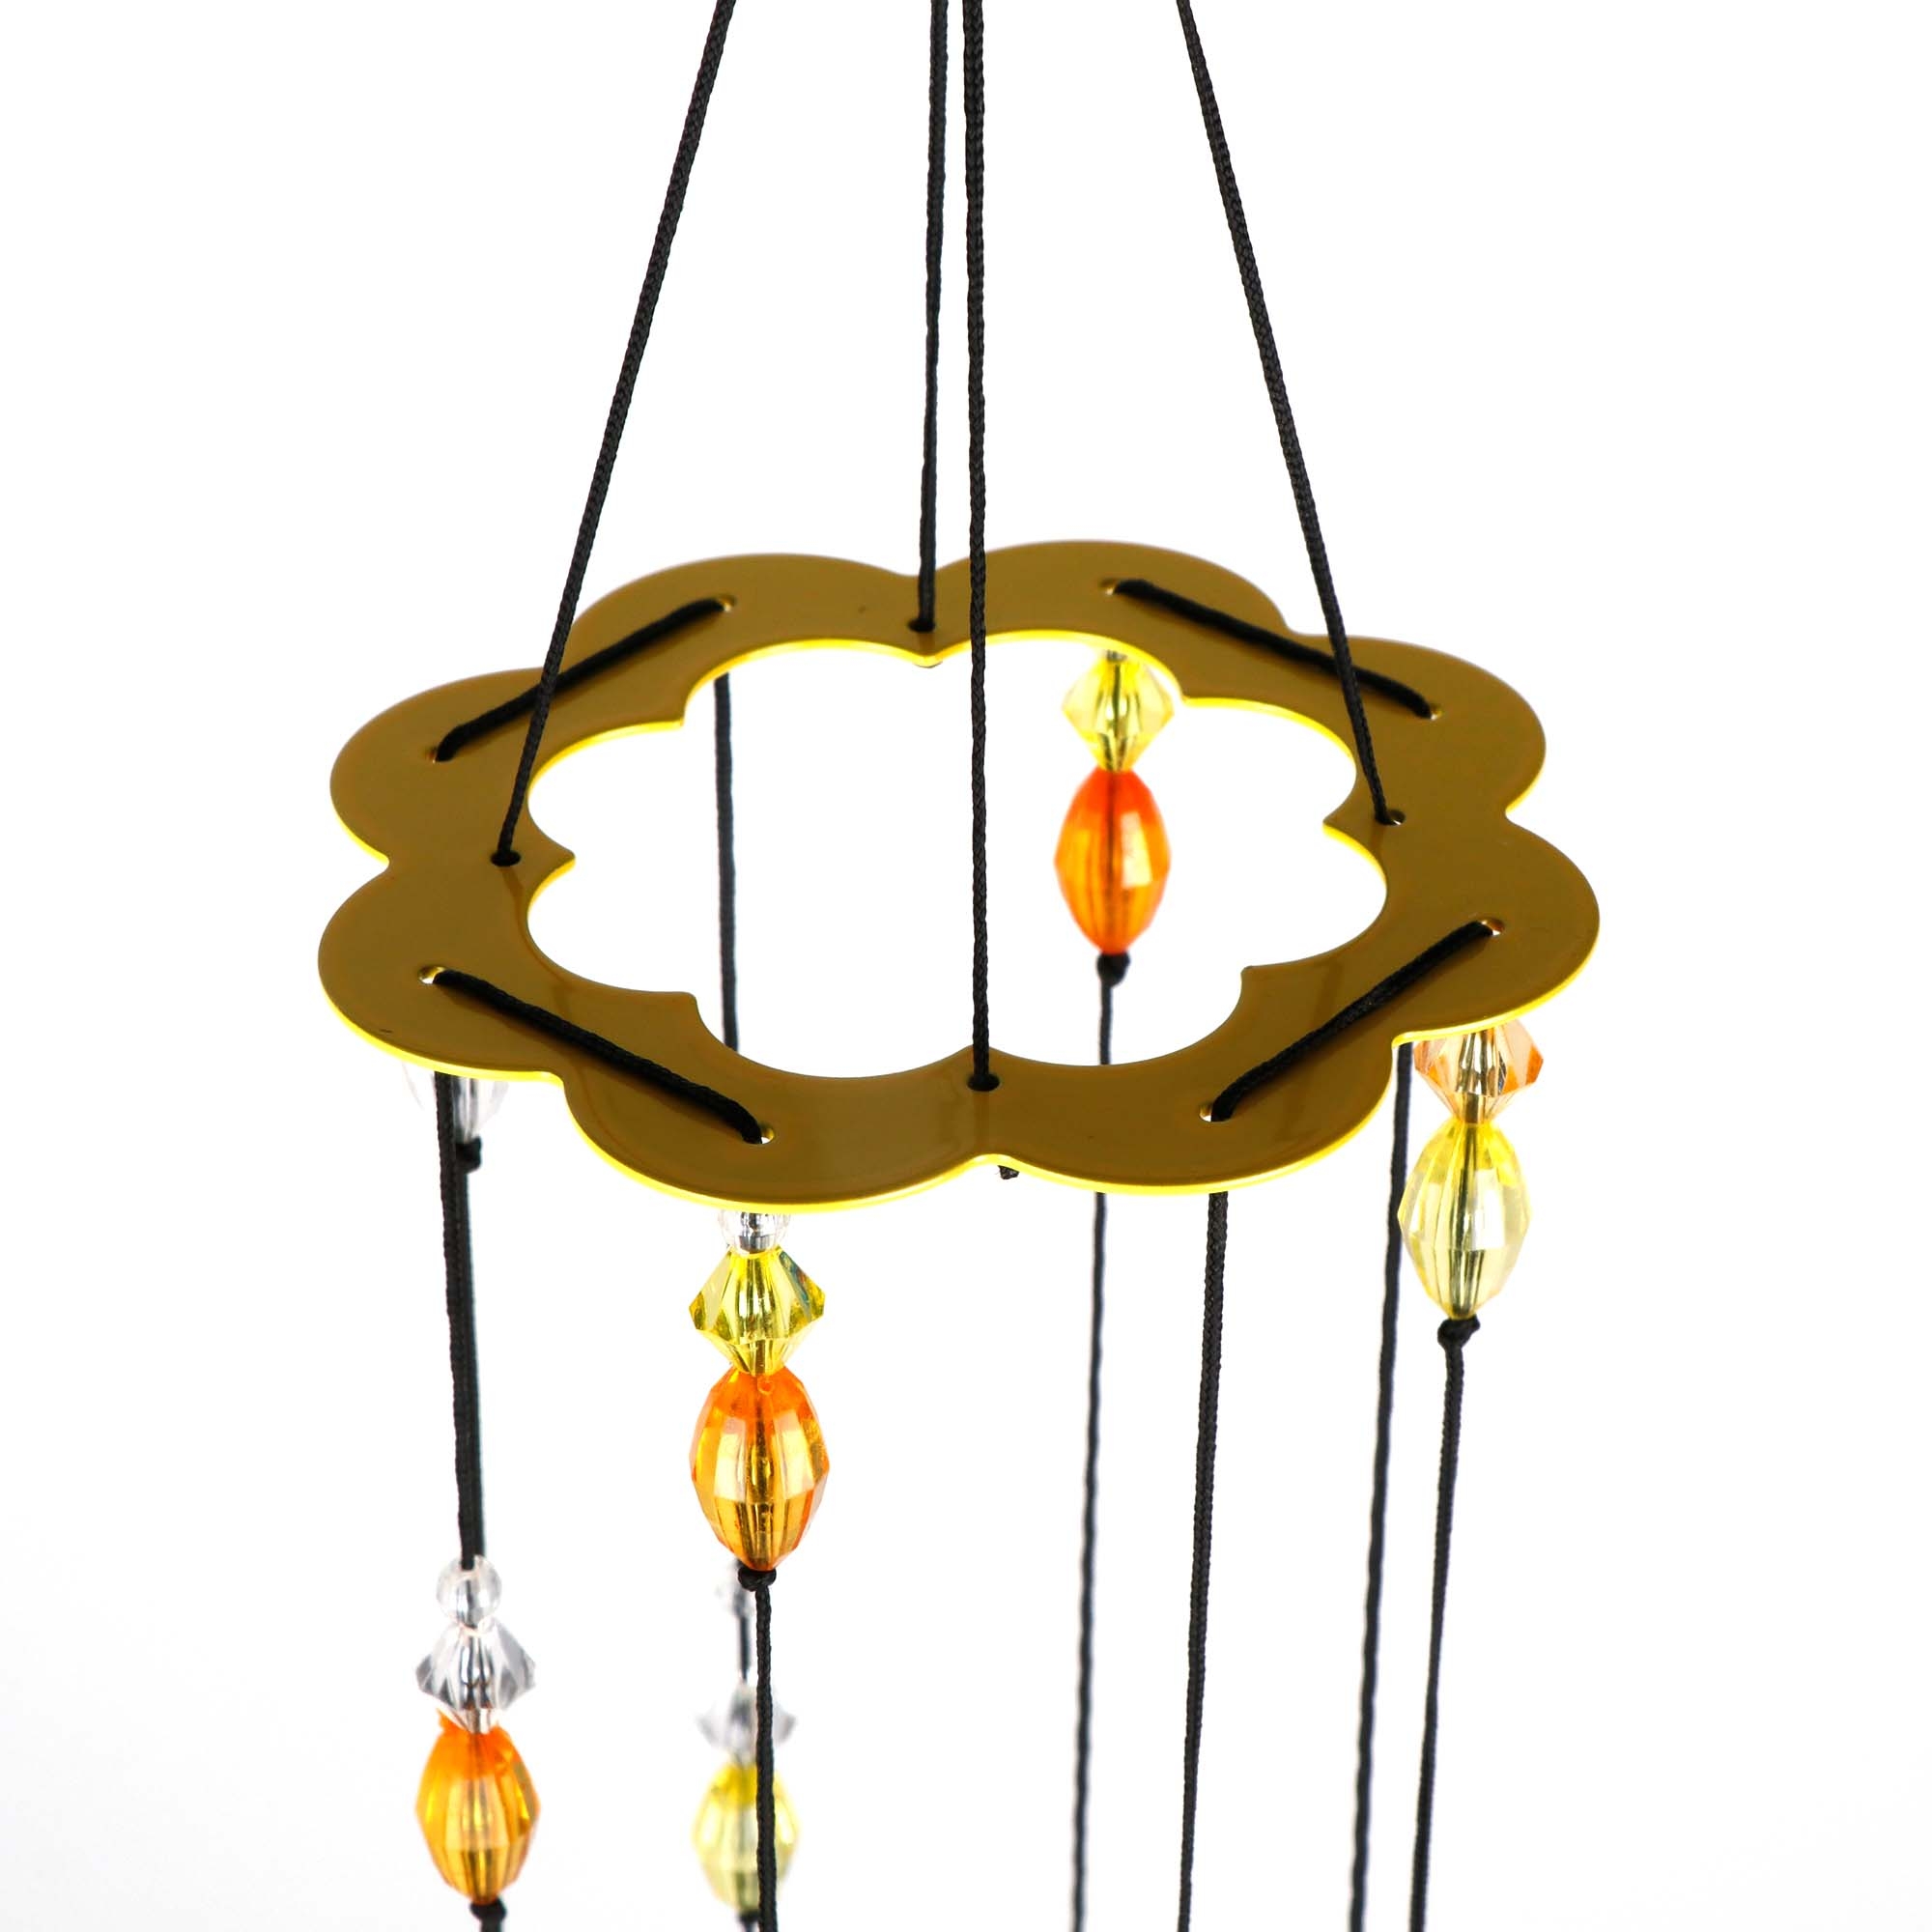 Archies | Archies KEEPSAKE Metal Wind Chimes with 4 Bells with Door wind chain Wall Hanger 55CM Multicolor 3